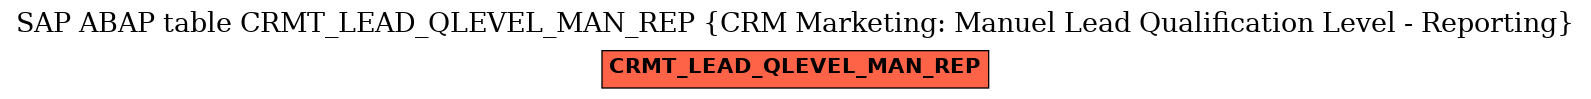 E-R Diagram for table CRMT_LEAD_QLEVEL_MAN_REP (CRM Marketing: Manuel Lead Qualification Level - Reporting)